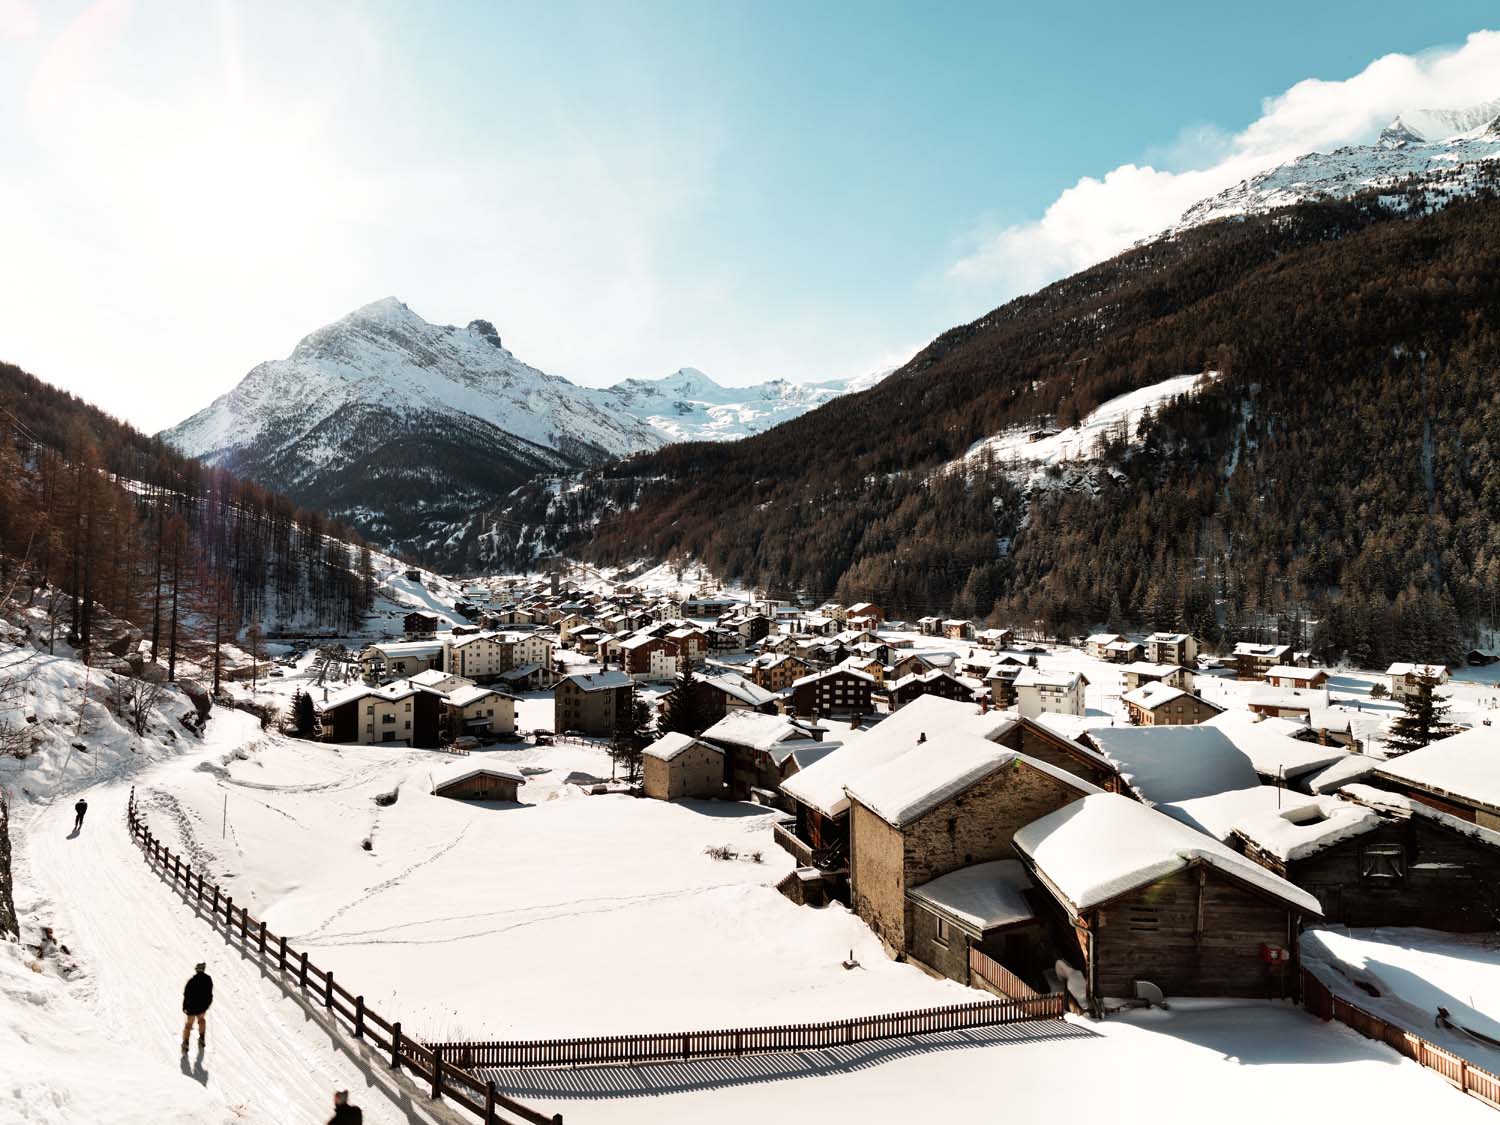 Saas-Fee is launching for the third time in the row the MountainCARD, a crowfunding campaign to get a season pass for CHF 255.